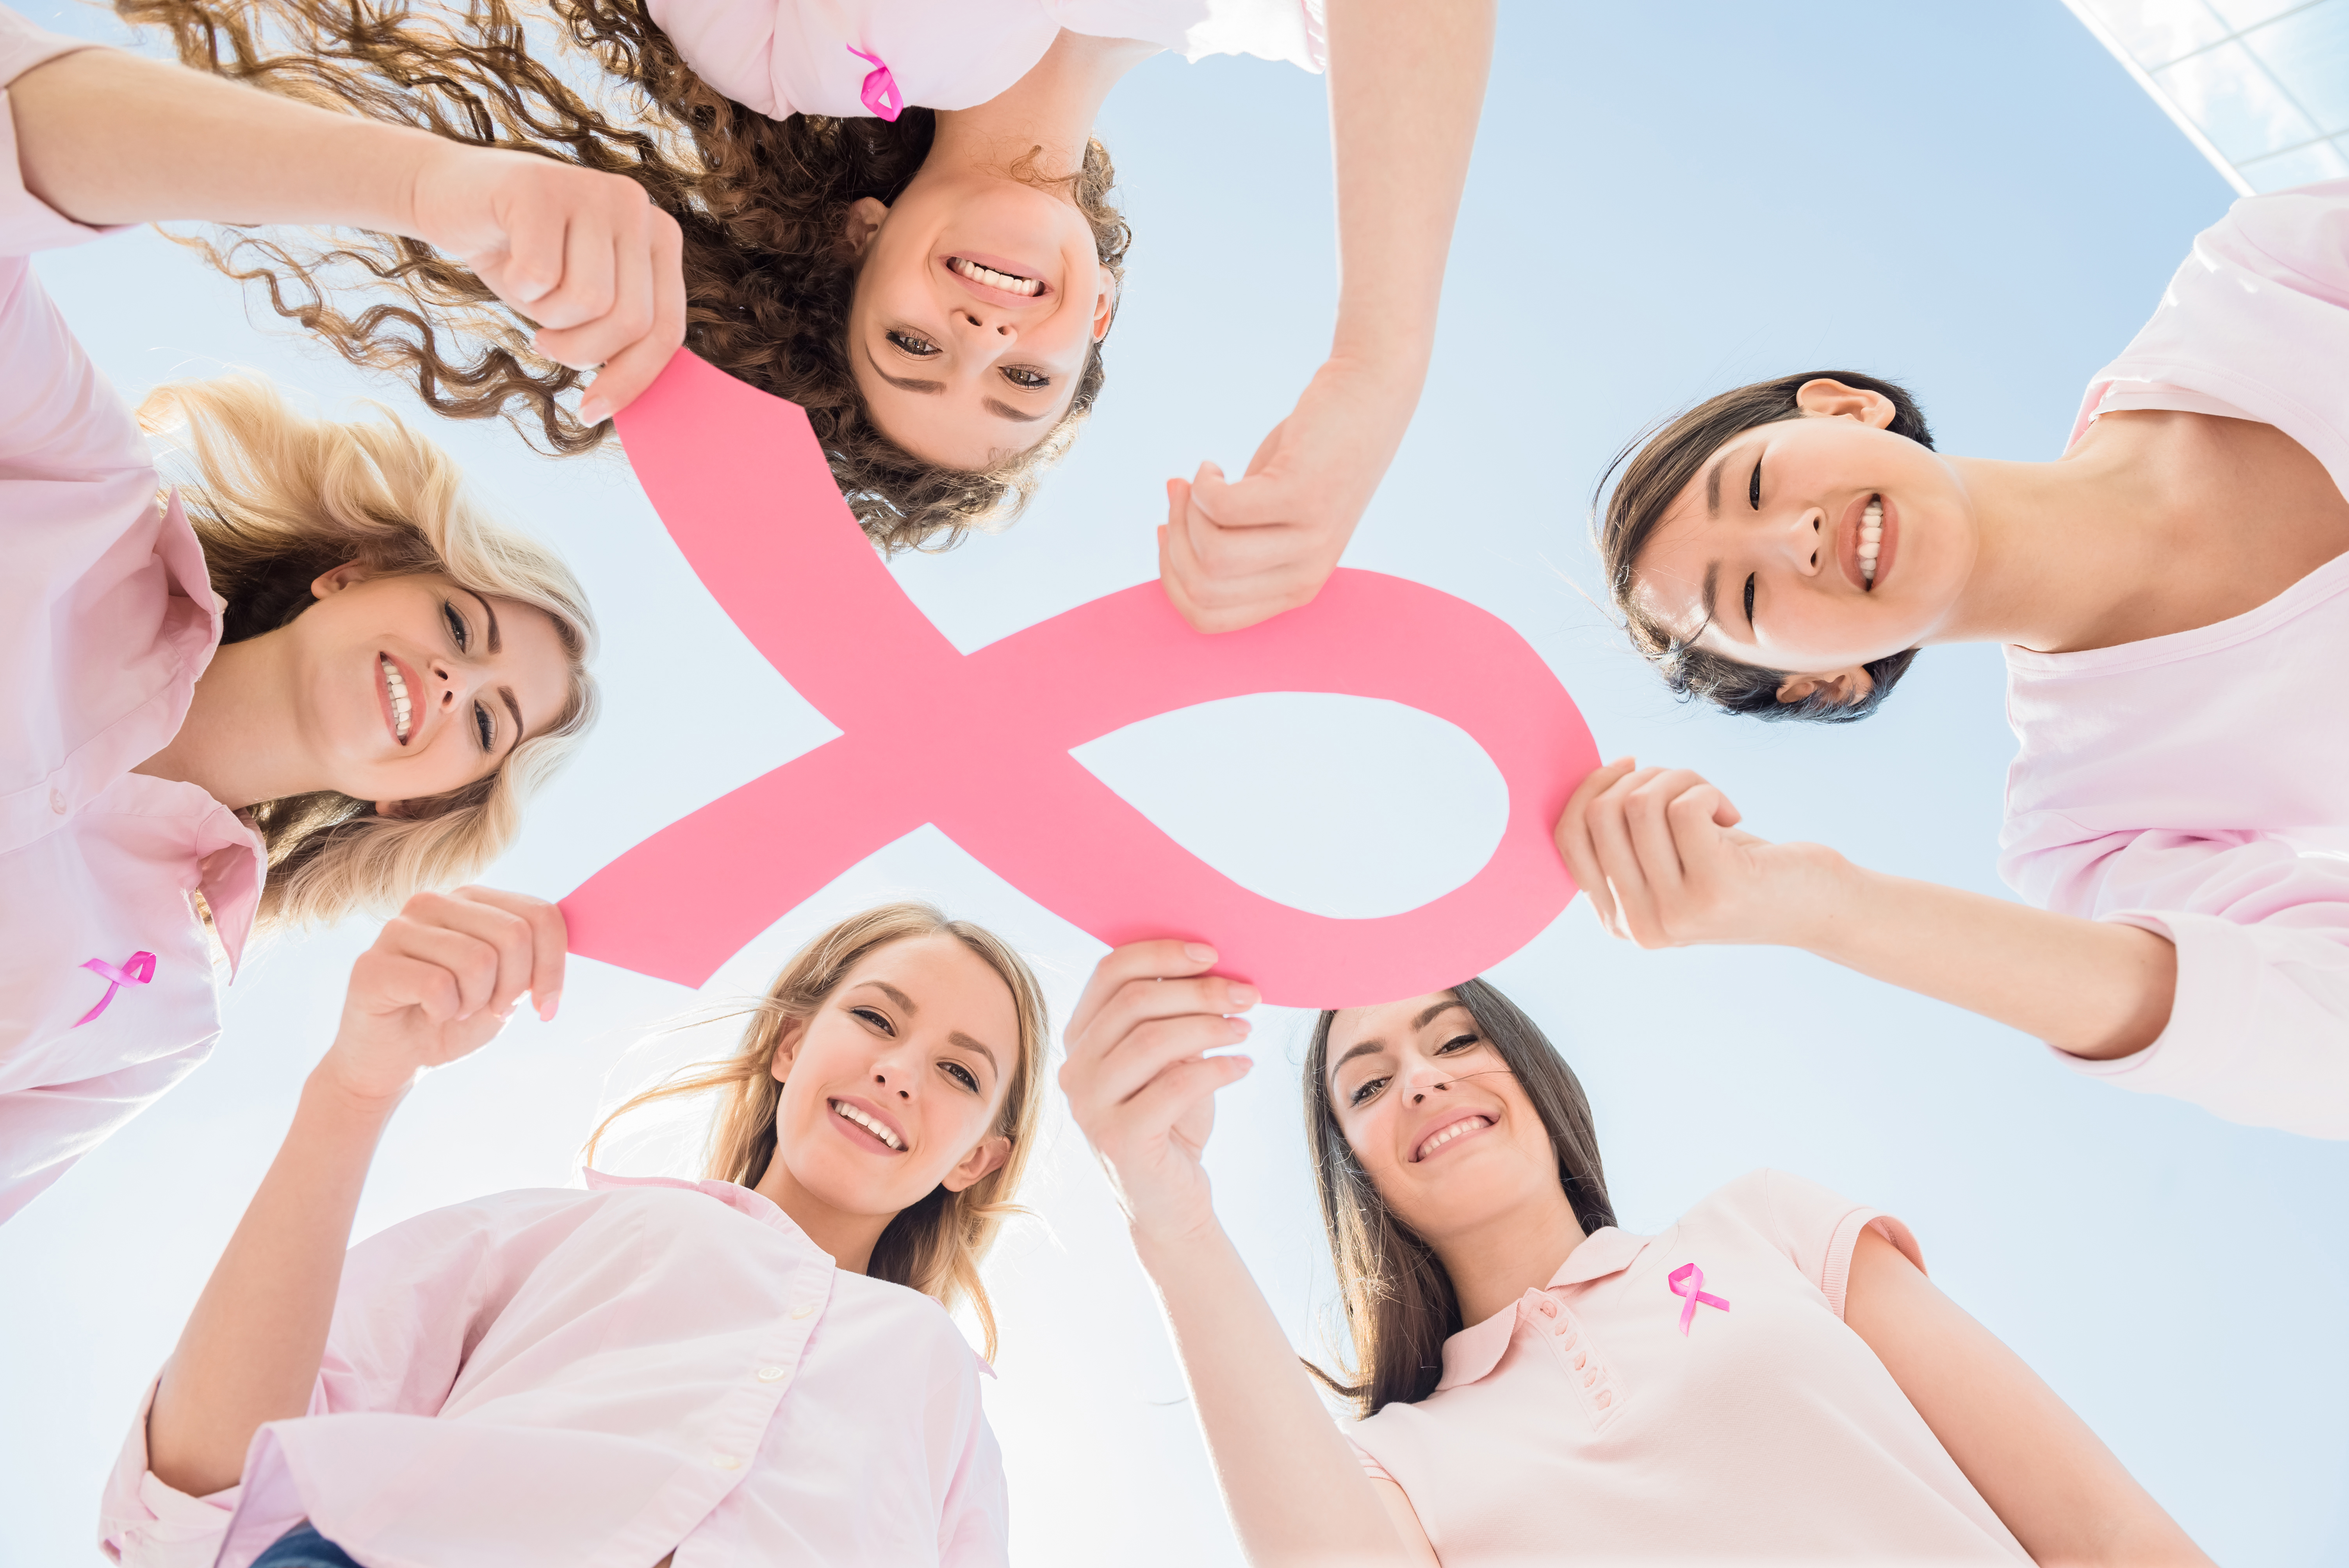 This is the image for the news article titled Breast Cancer Awareness Month